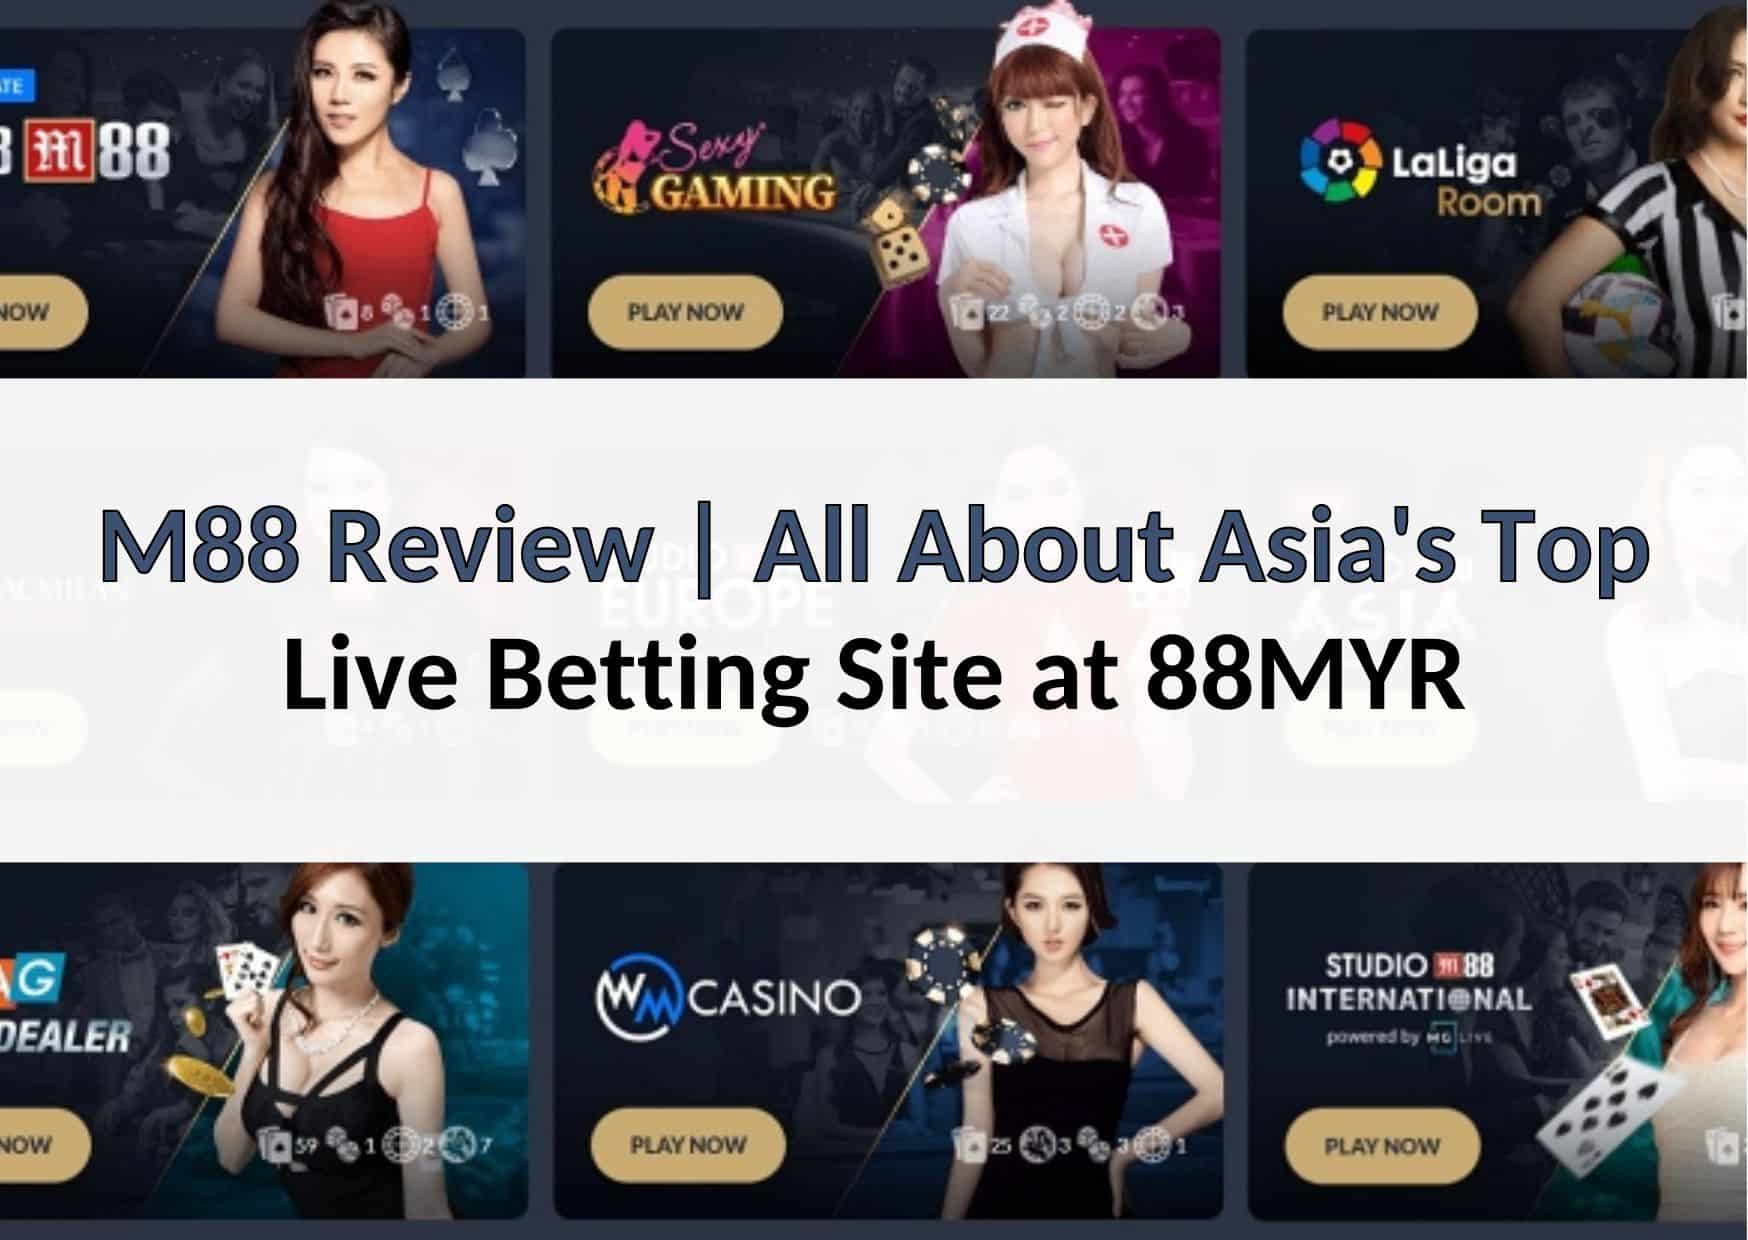 M88 Review | All About Asia's Top Live Betting Site at 88MYR